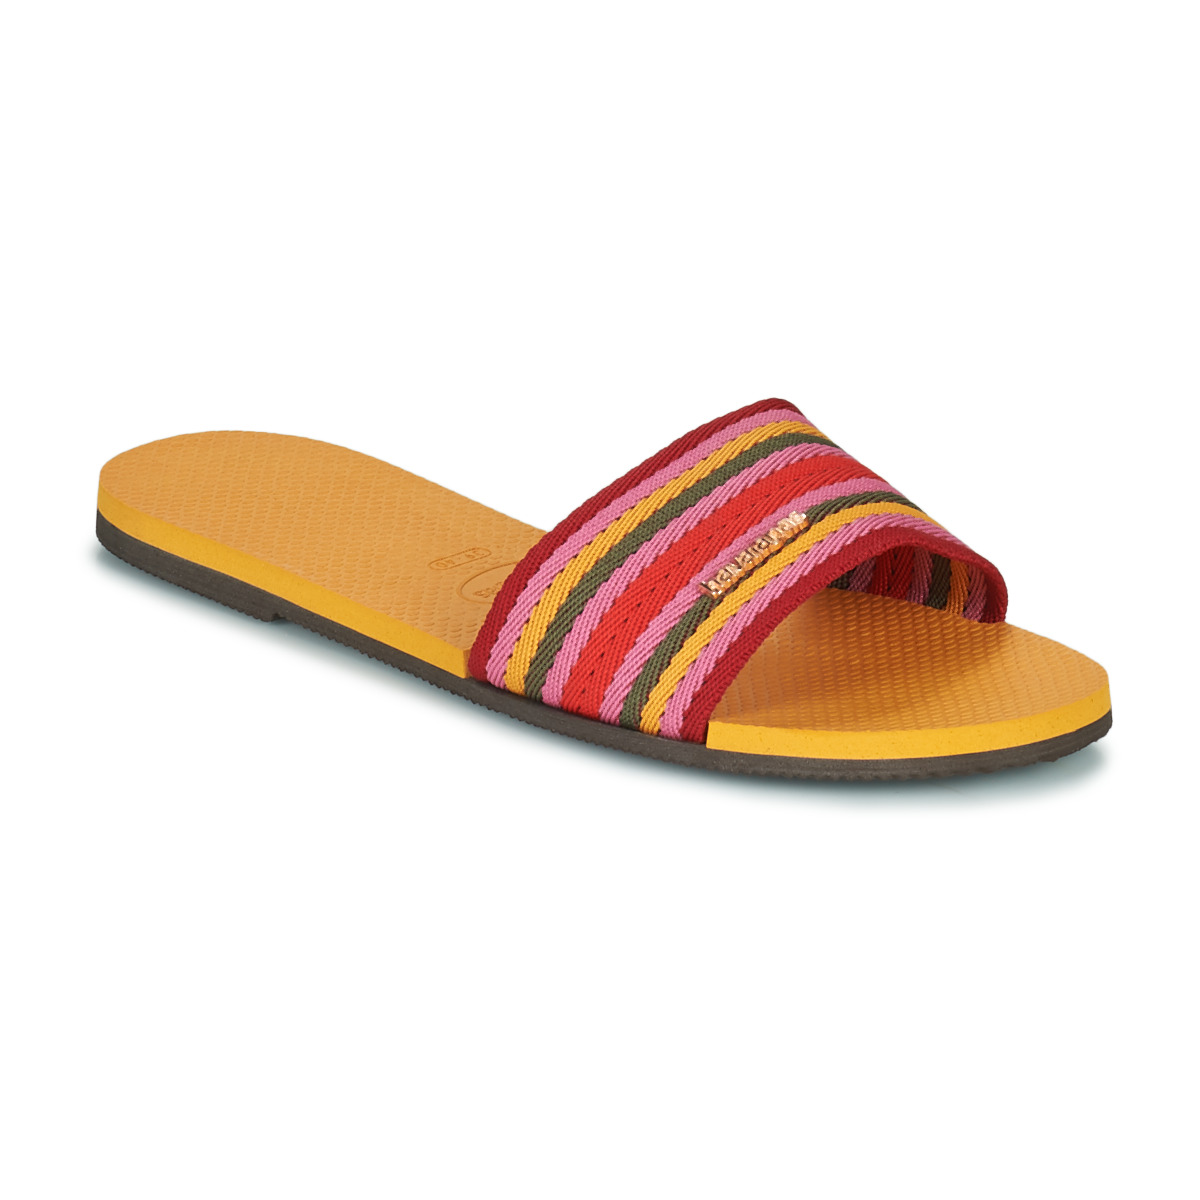 havaianas  you malta mix  women's mules / casual shoes in multicolour